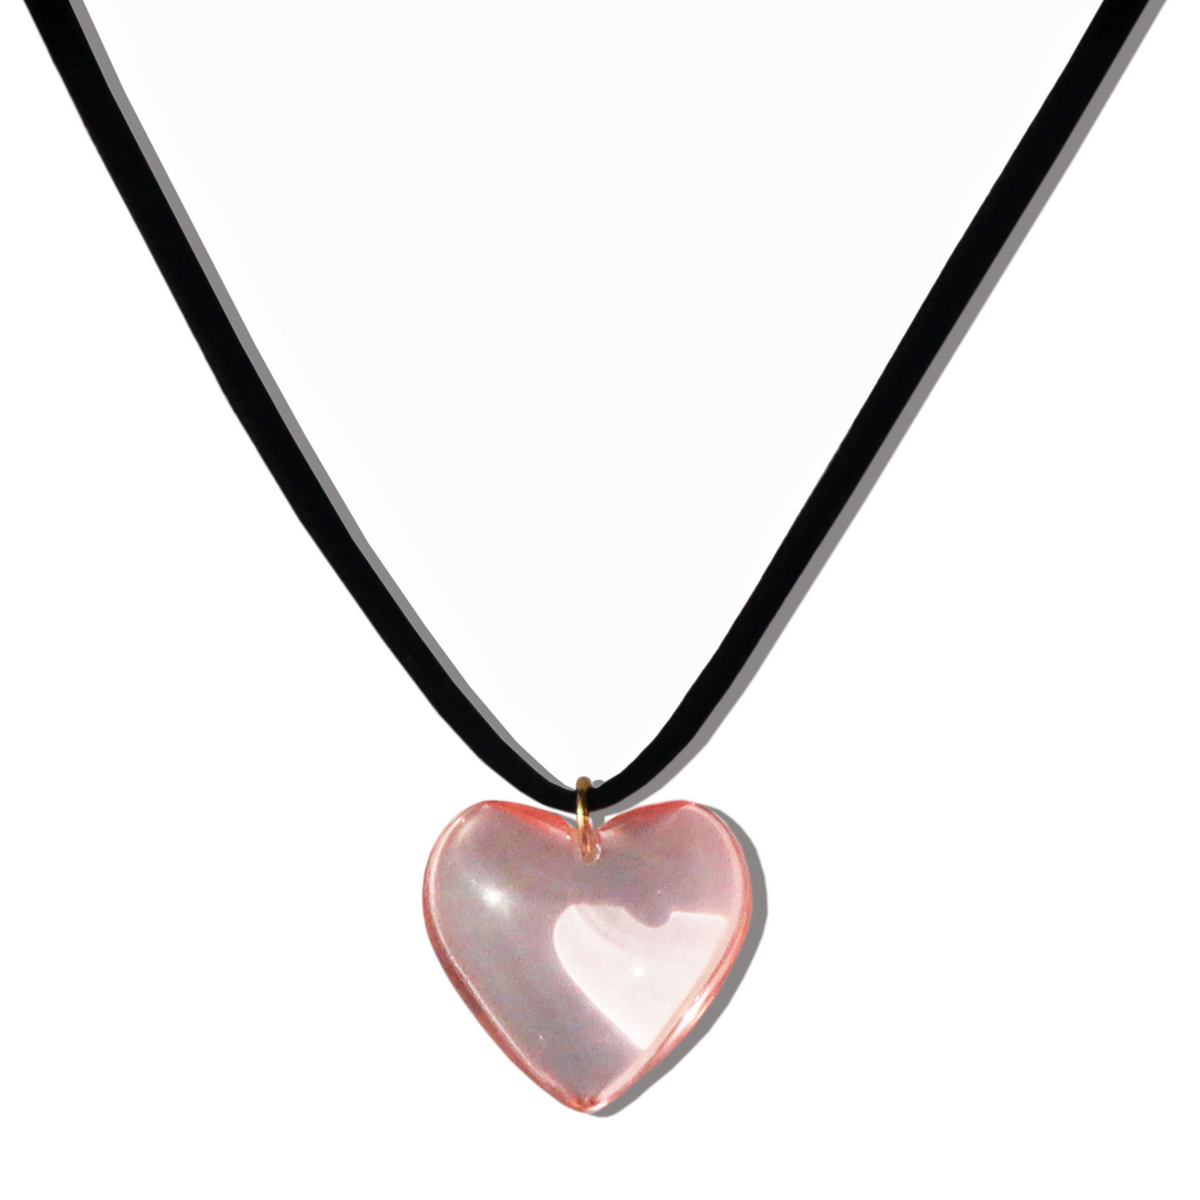 Trendy designs to choose in glass necklaces